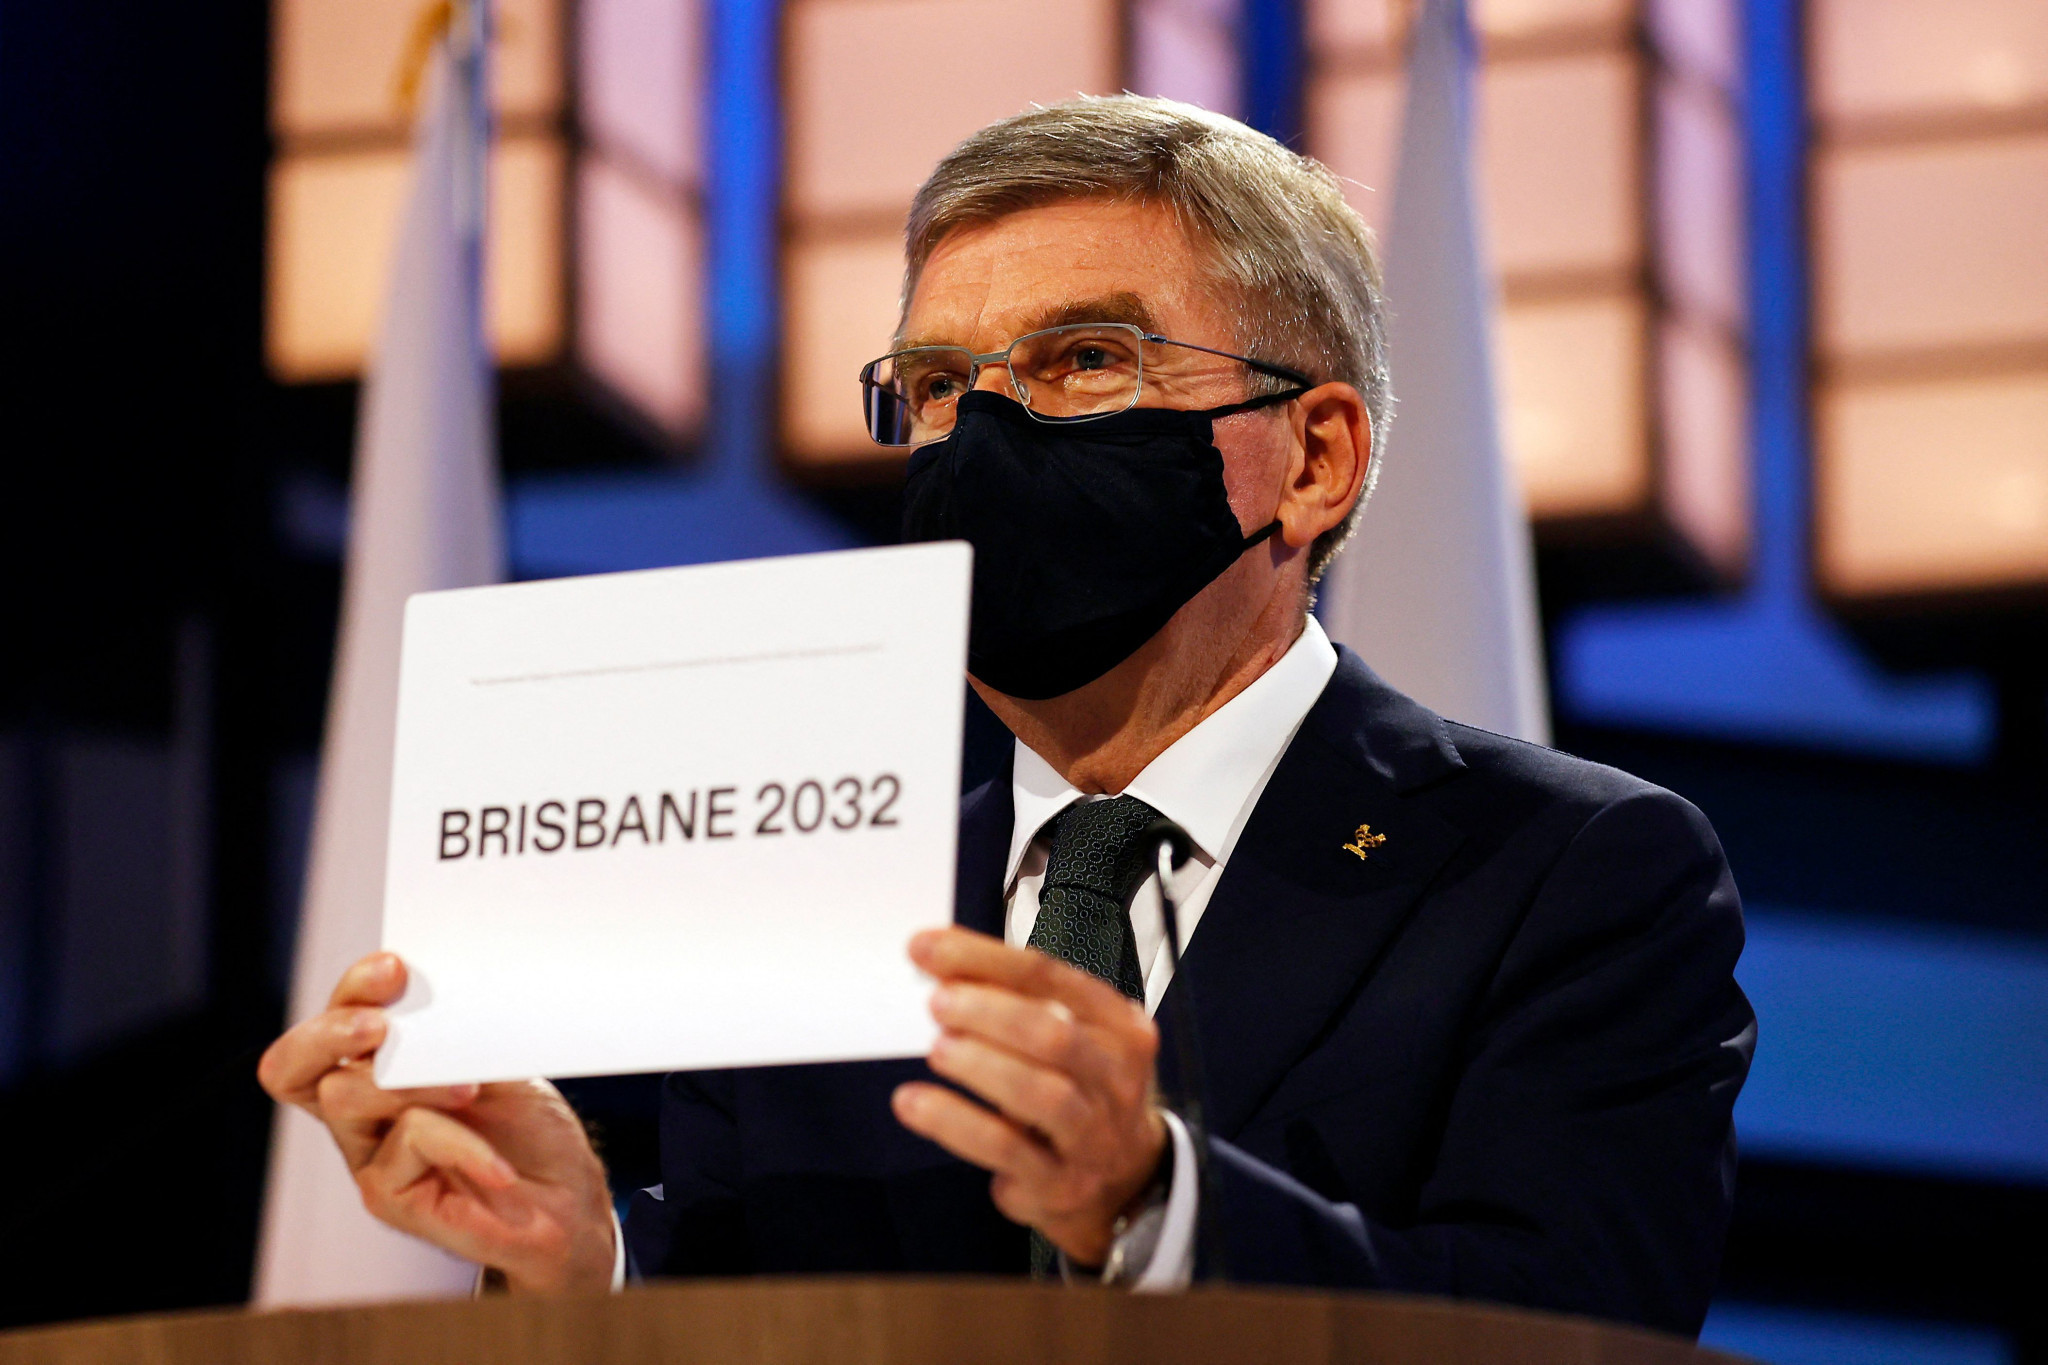 Brisbane was awarded the 2032 Olympic and Paralympic Games at the 2021 Session in Tokyo ©Getty Images